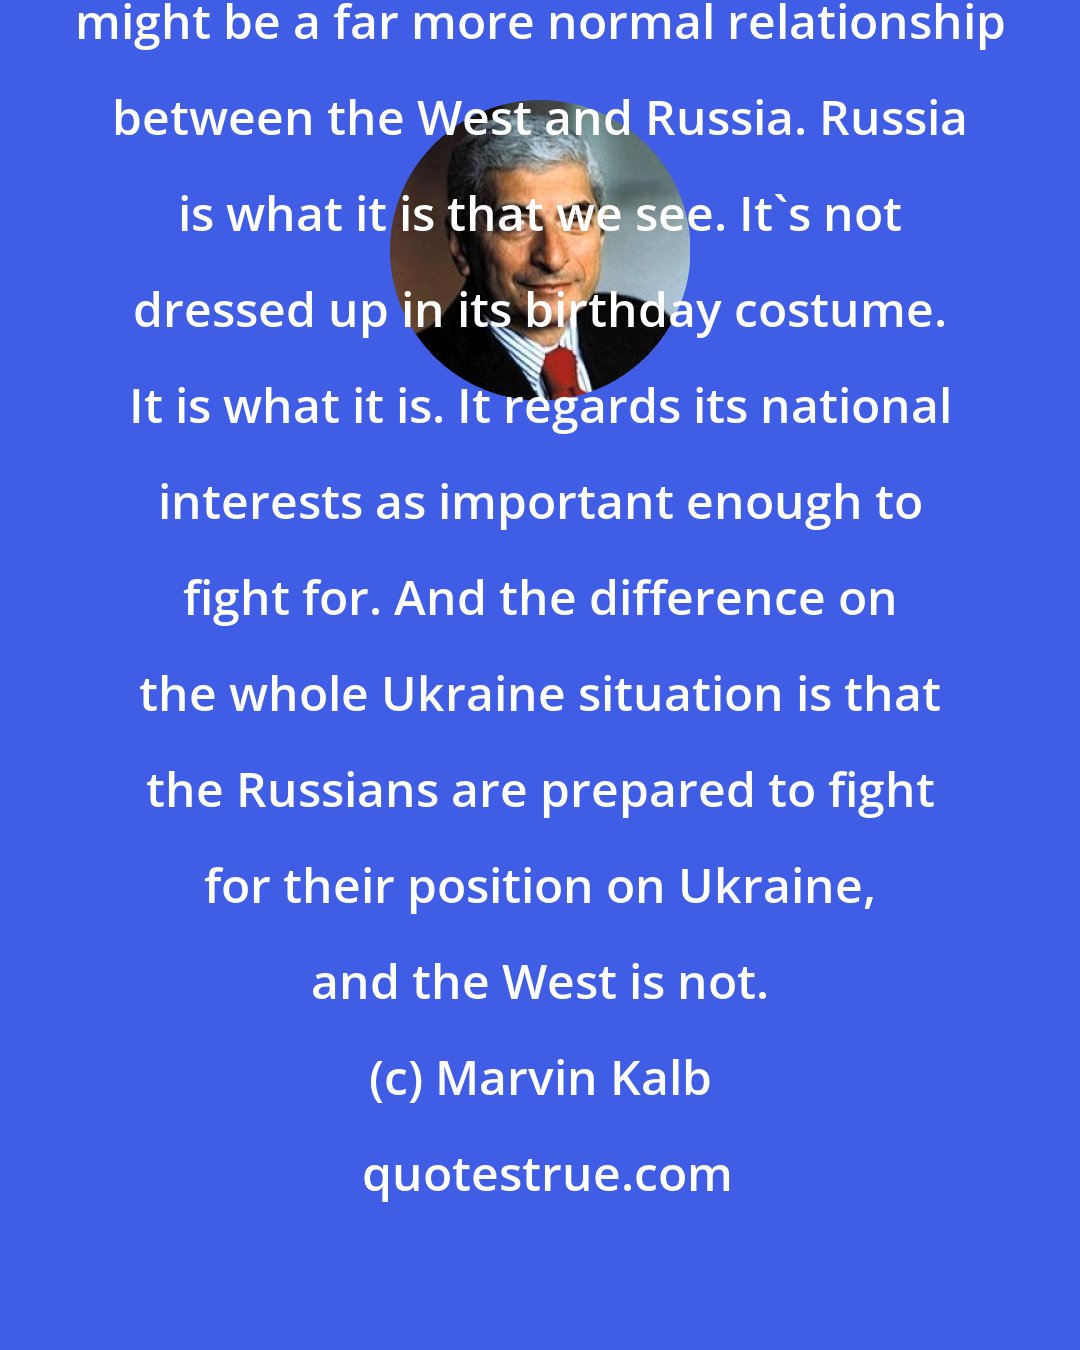 Marvin Kalb: we are dealing with a return to what might be a far more normal relationship between the West and Russia. Russia is what it is that we see. It's not dressed up in its birthday costume. It is what it is. It regards its national interests as important enough to fight for. And the difference on the whole Ukraine situation is that the Russians are prepared to fight for their position on Ukraine, and the West is not.